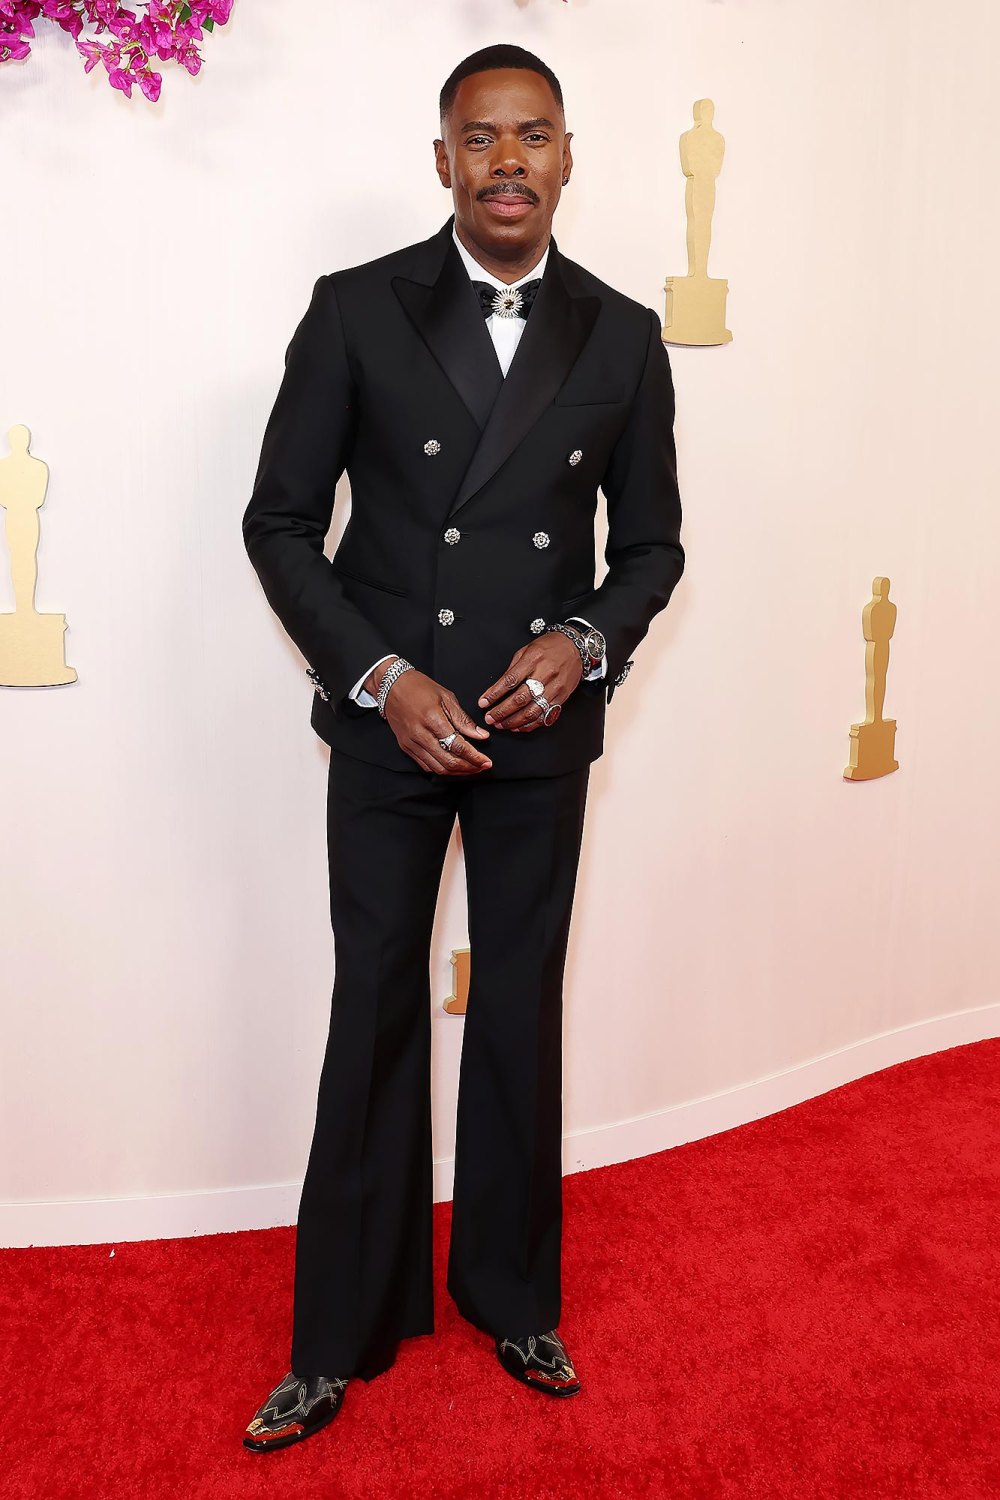 Feature Colman Domingo Adds a Western Flair to the Oscars Red Carpet With Gold-Tipped Cowboy Boots